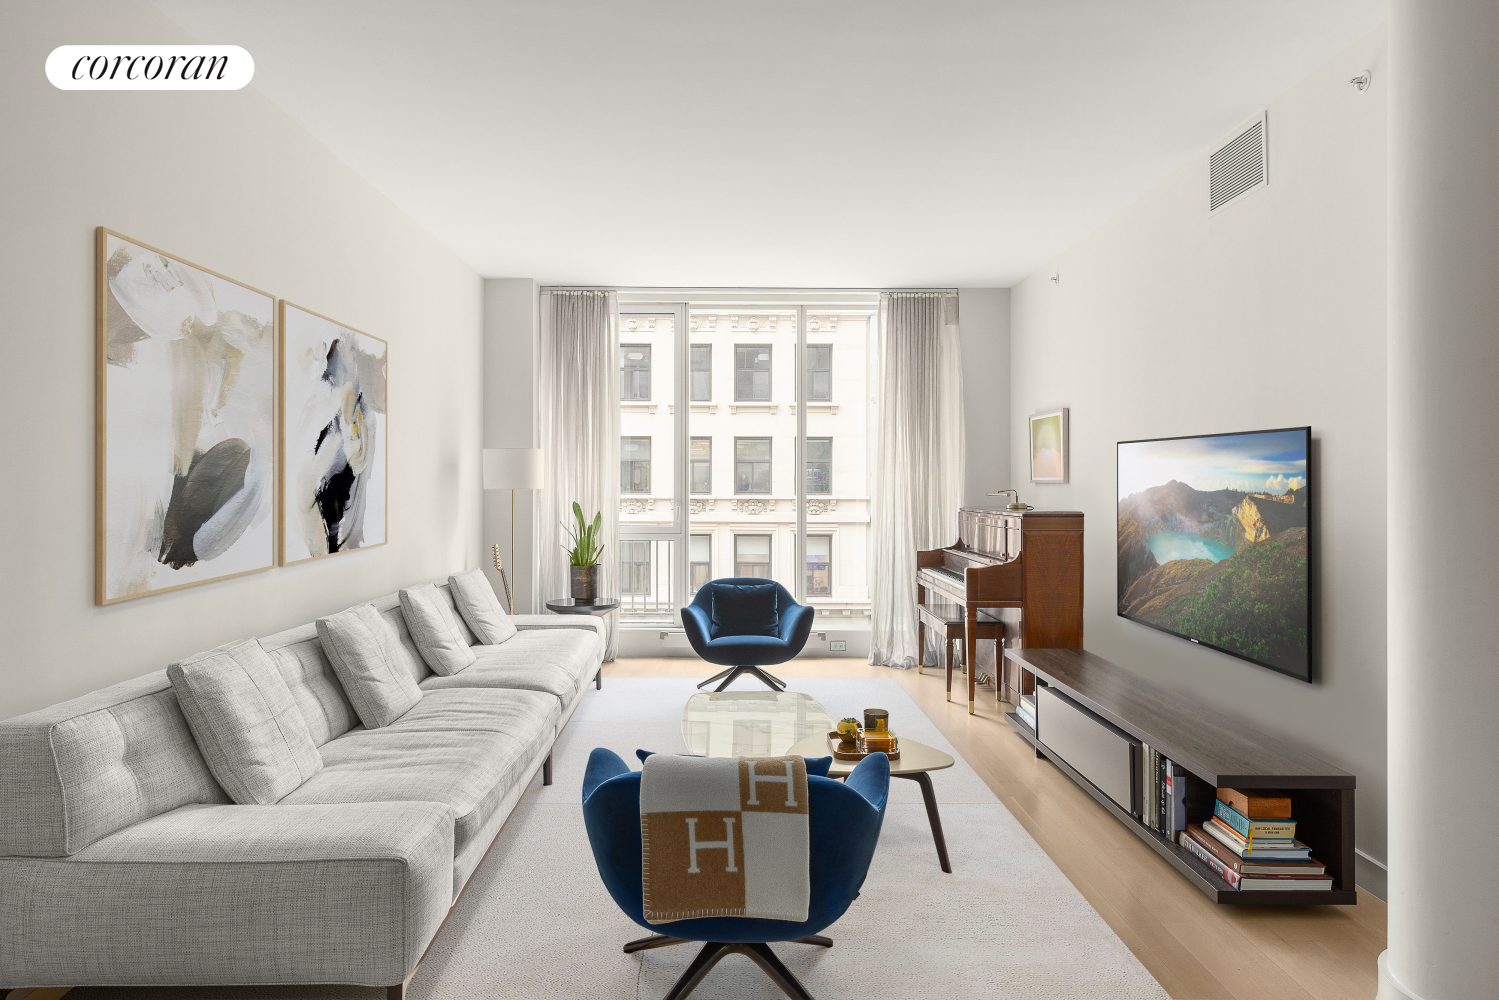 241 5th Avenue 5B, Nomad, Downtown, NYC - 3 Bedrooms  
3.5 Bathrooms  
6 Rooms - 